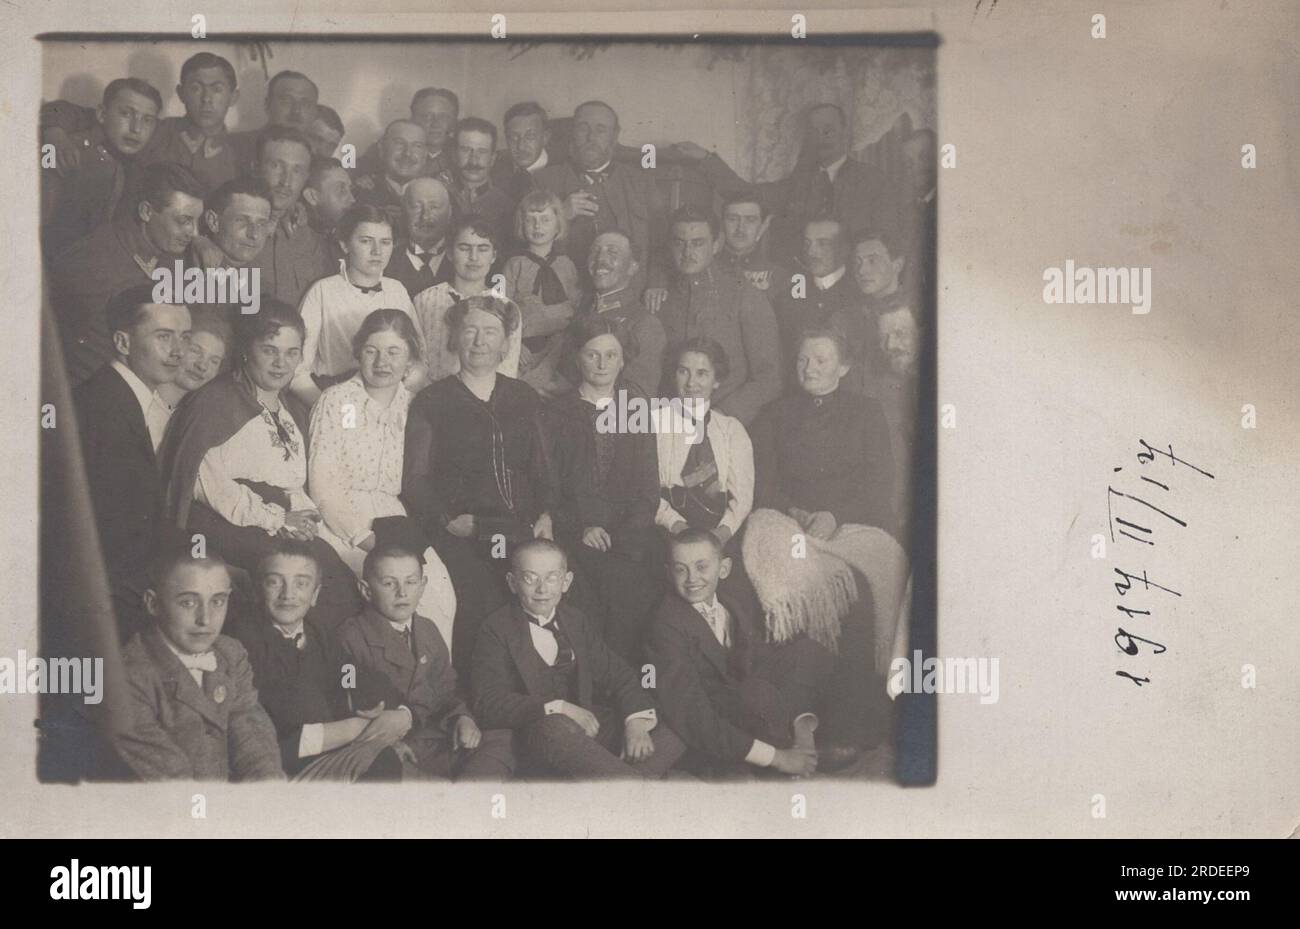 school class photo and reunion photo togedher from 1917.02.17. the members of the reunion class are serving in the austro-hungarian army as the great war is still on the little boys are too young to give military service. Stock Photo